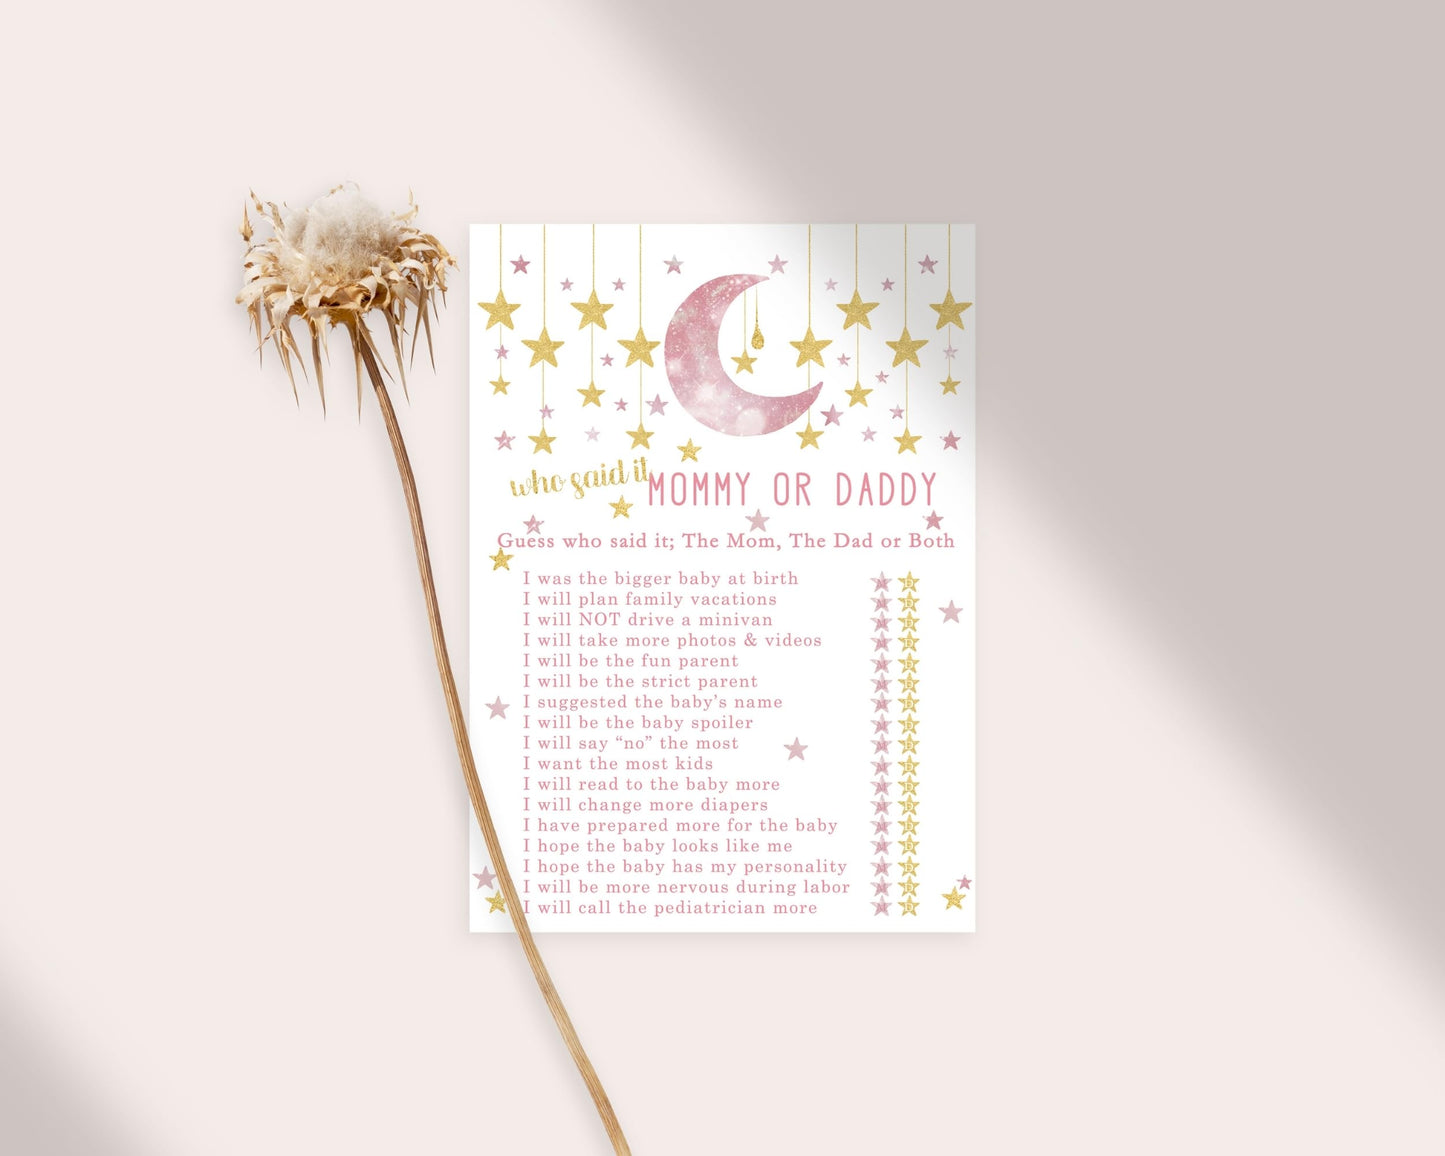 Gold Moon Themed Ideas, 25 PackPaper Clever Party